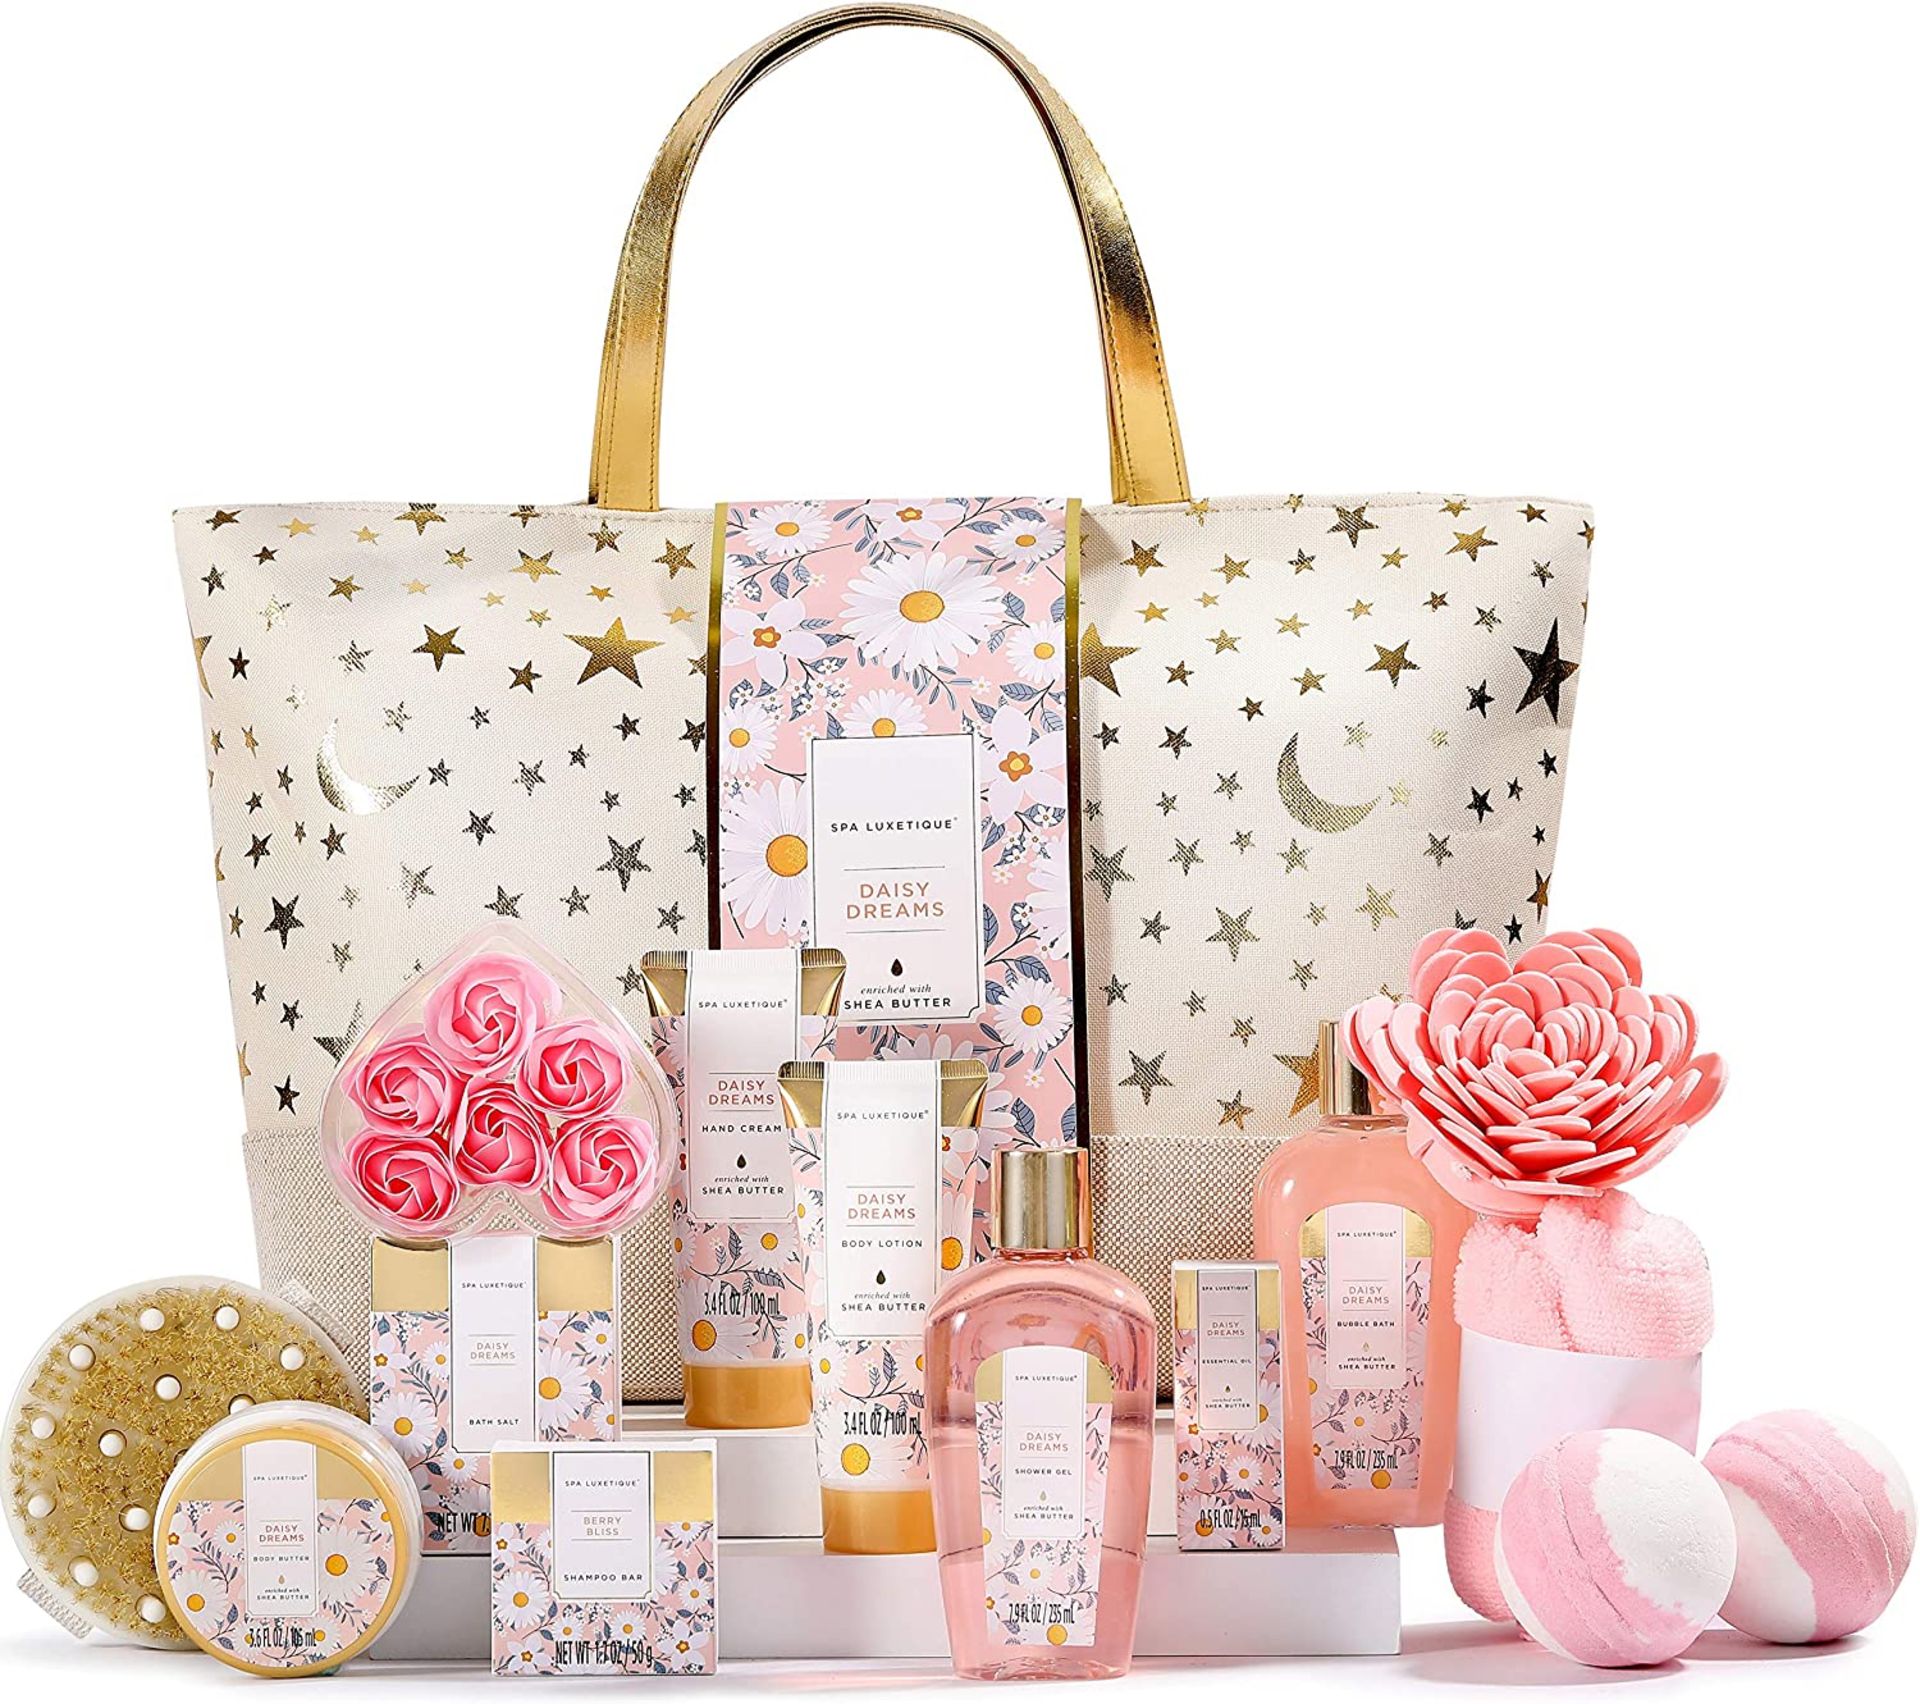 4 X NEW BOXED SPA LUXETIQUE DAISY DREAMS 15 PIECE GIFT SET WITH BAG. RRP £49.99 EACH. ENRICHED